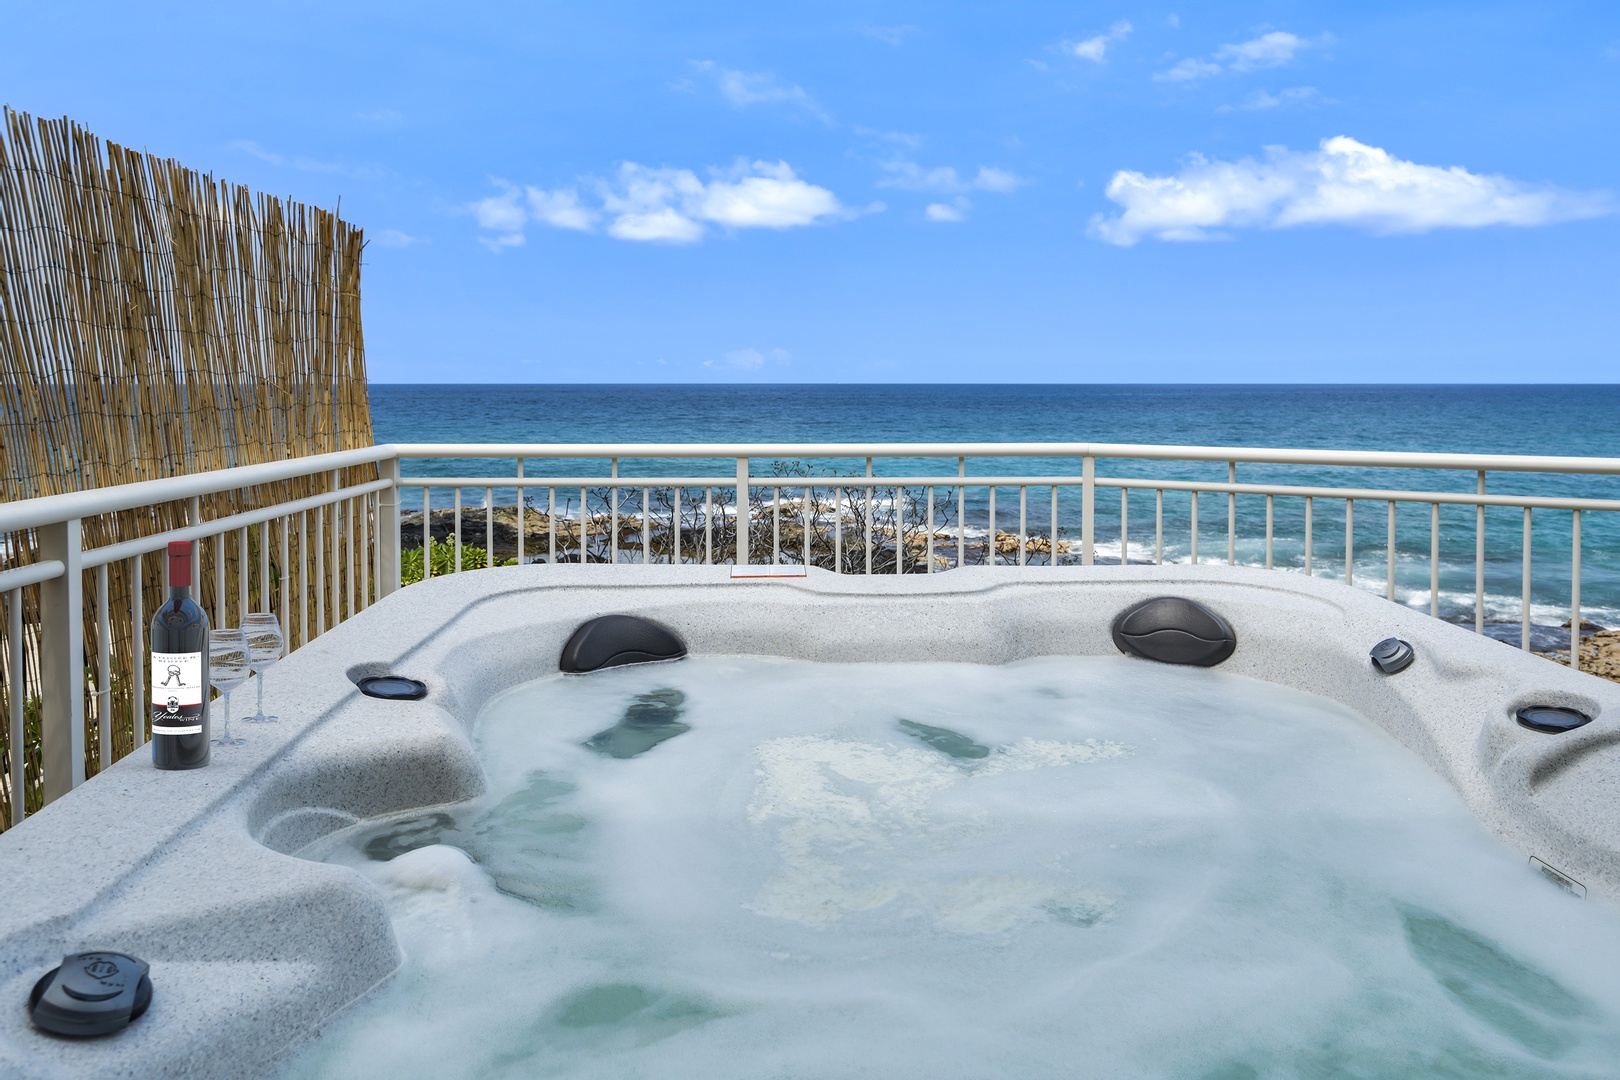 Kailua Kona Vacation Rentals, Ali'i Point #12 - Relax in the hot tub with a front-row view of the ocean in our premium Hawaiian vacation home, perfect for serene getaways.